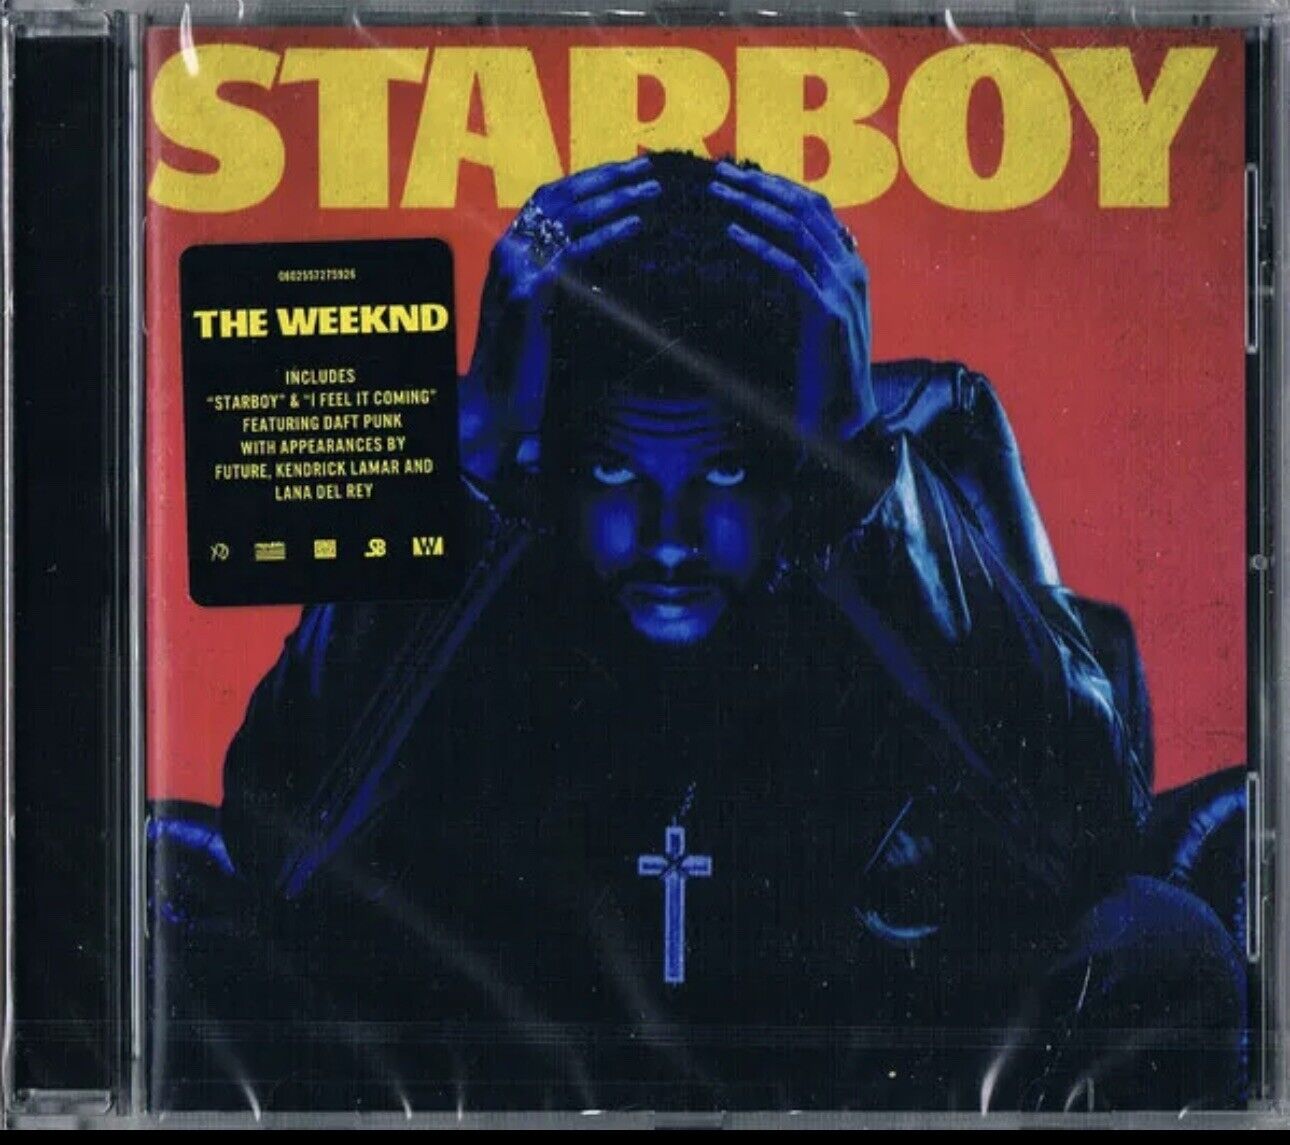 Starboy [Explicit Lyrics] CD by The Weeknd - Brand New Sealed 